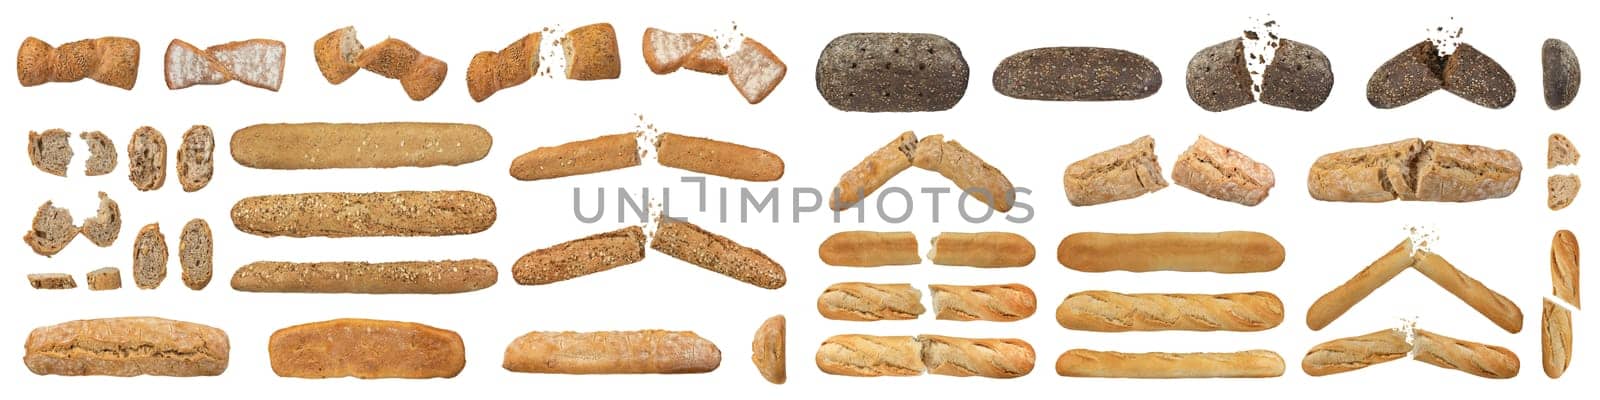 Many different loaves of bread, different varieties and shapes isolated on a white background. Full size loaves of bread, cut into slices or broken apart. Bread isolate for inserting into design. by SERSOL